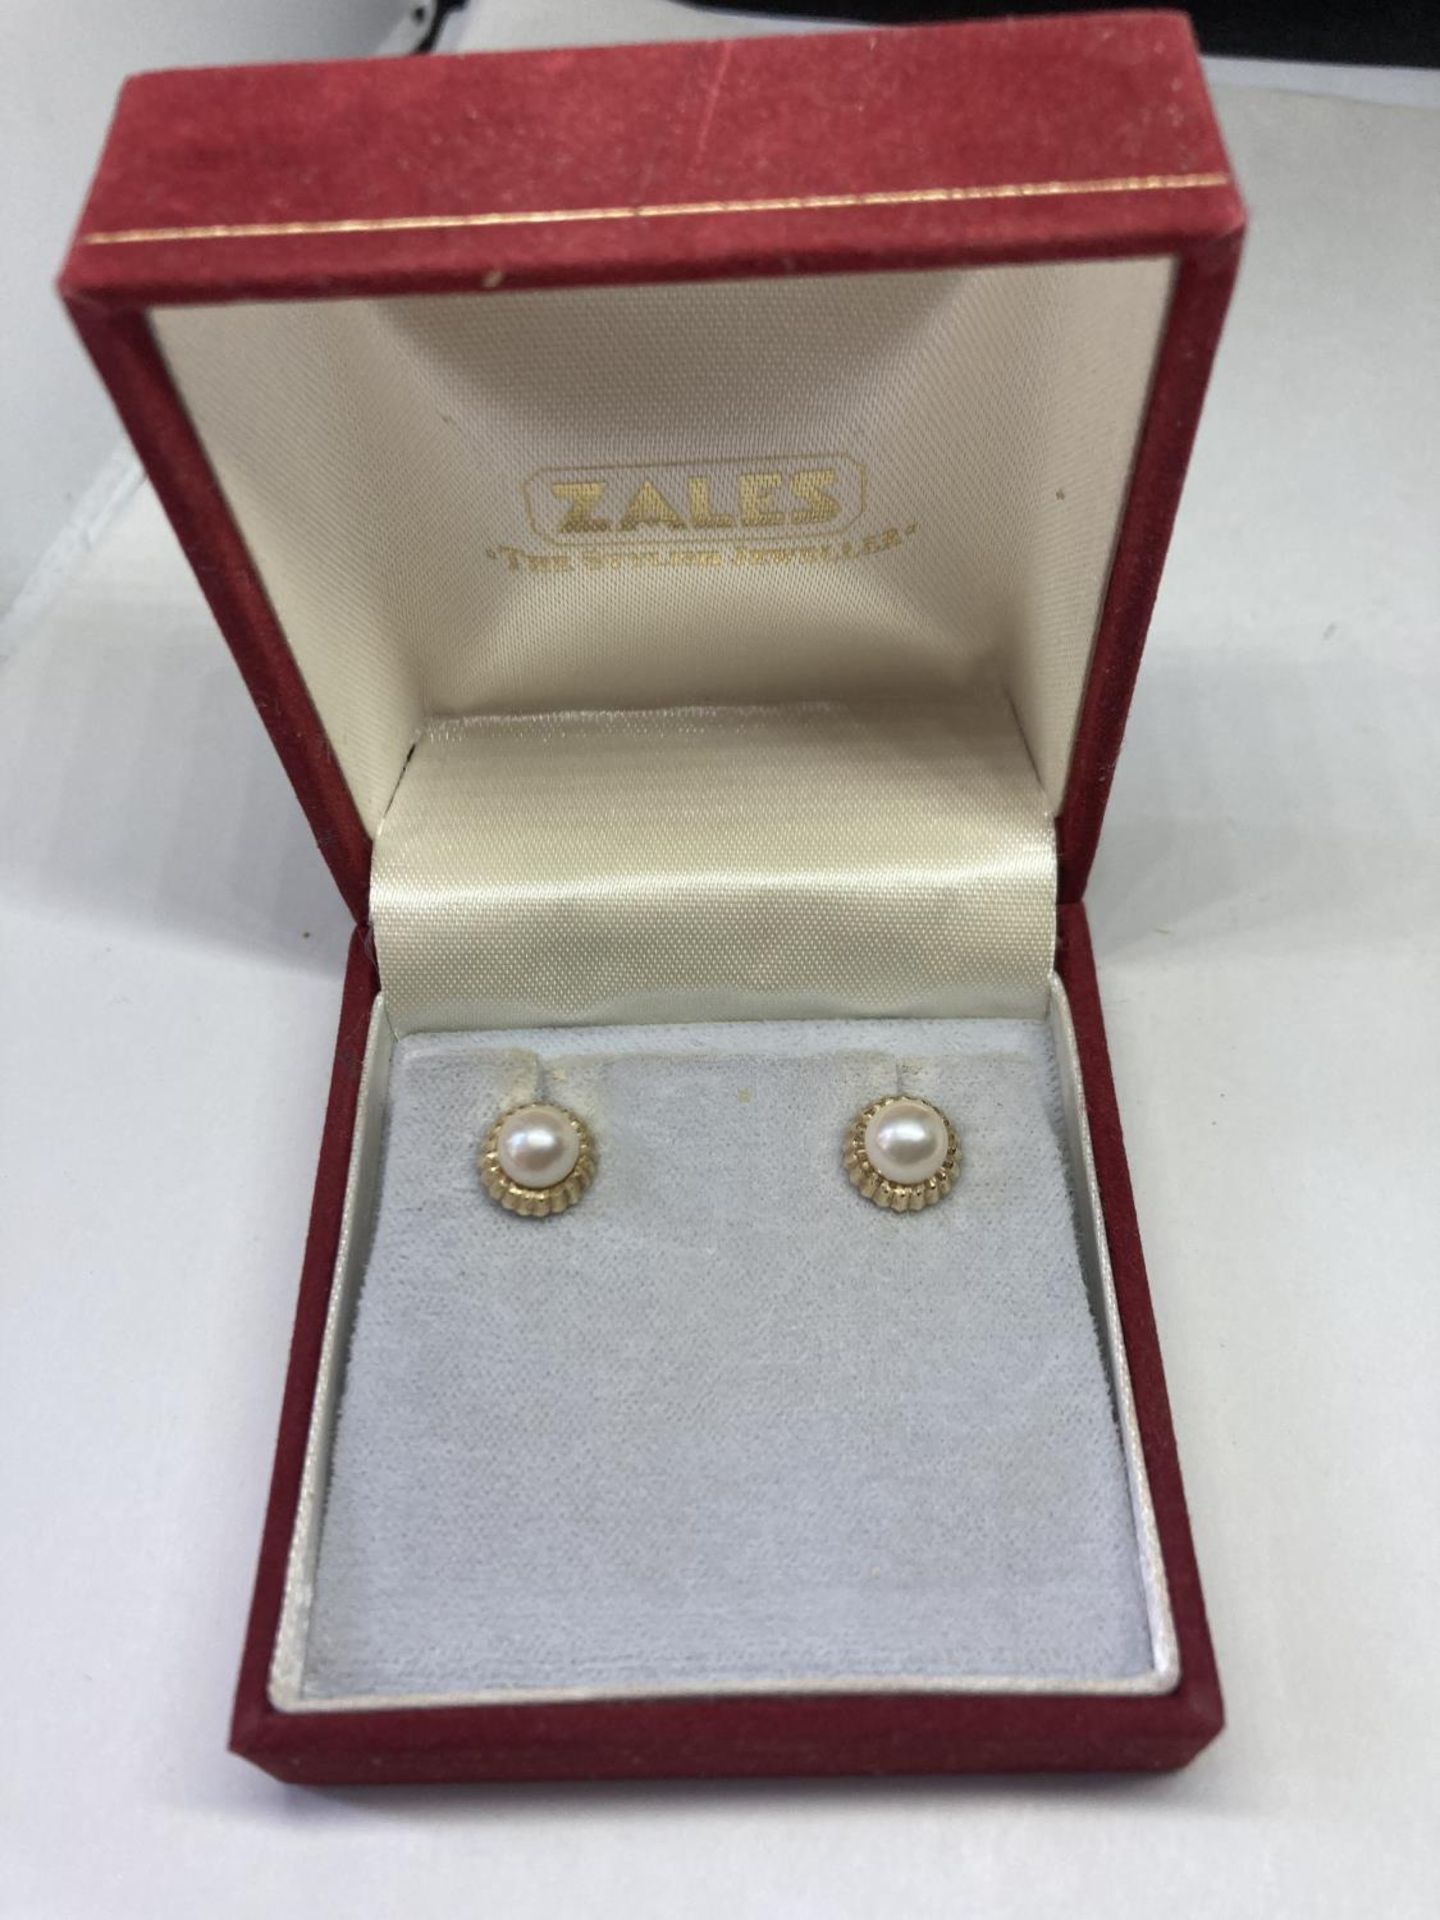 A PAIR OF 9 CARAT GOLD AND PEARL EARRINGS IN A PRESENTATION BOX